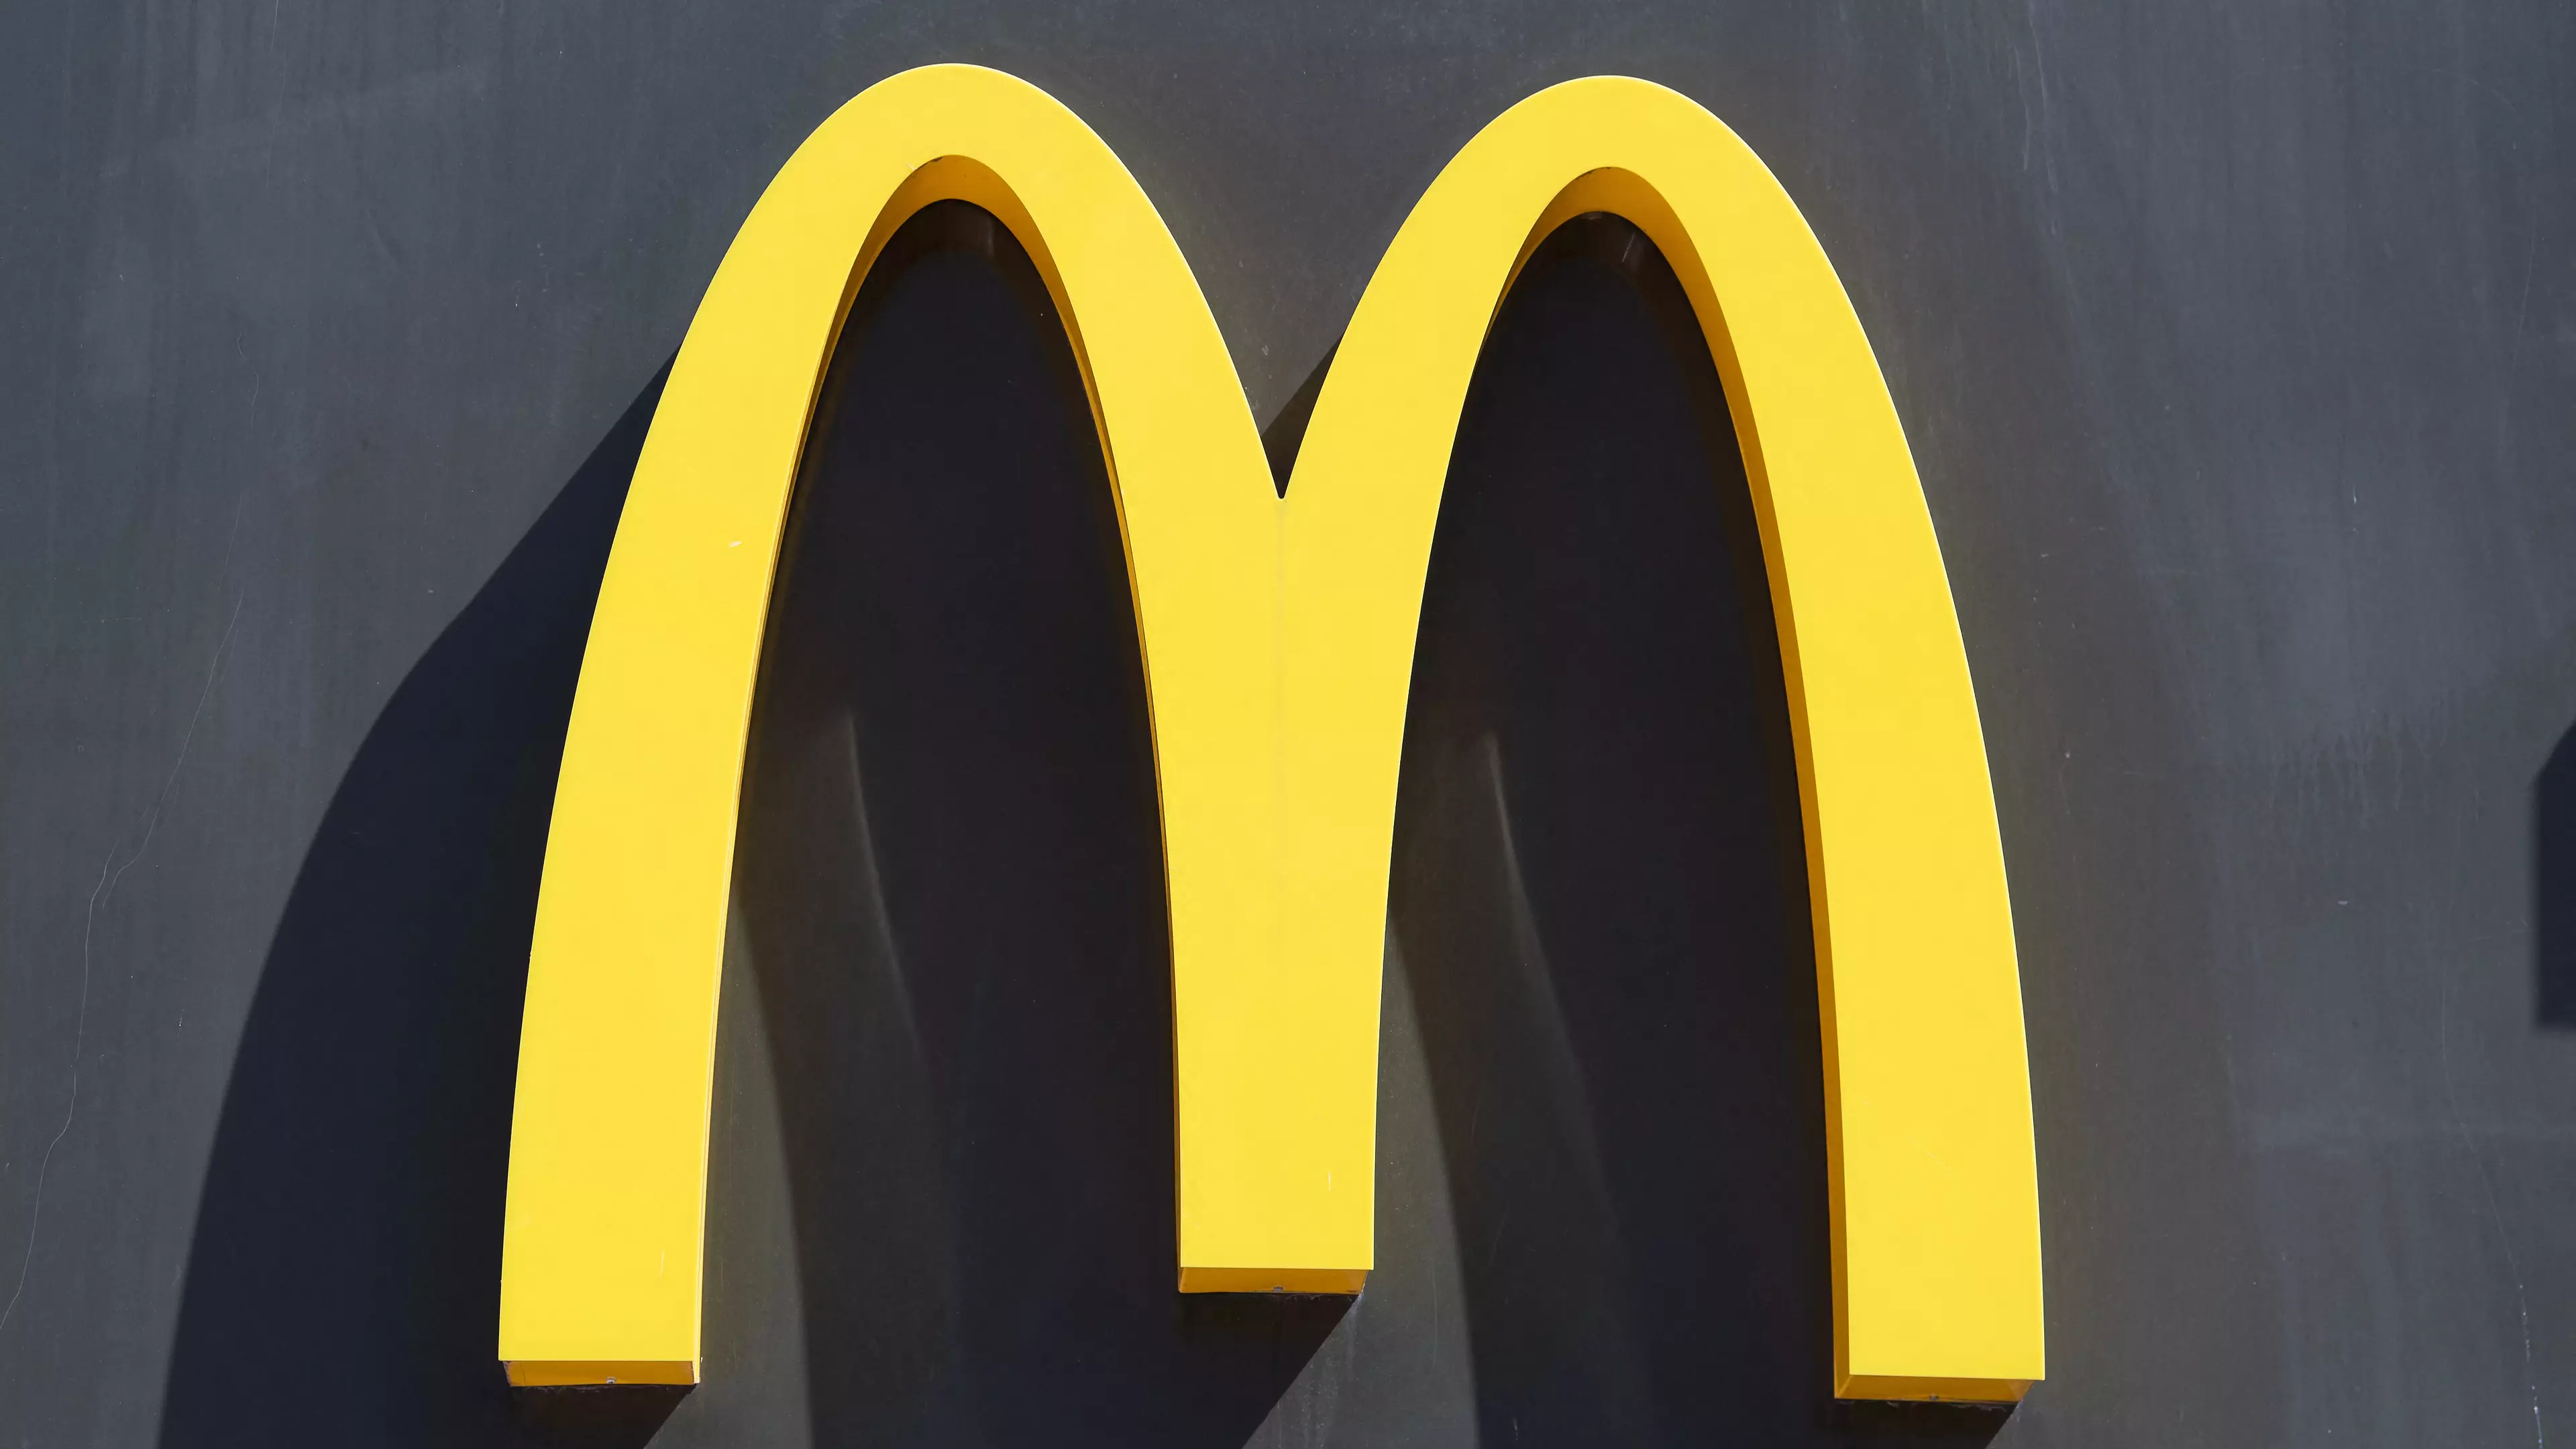 Aussie McDonald's Worker Shocked By Monstrously Large Order Worth $3,400